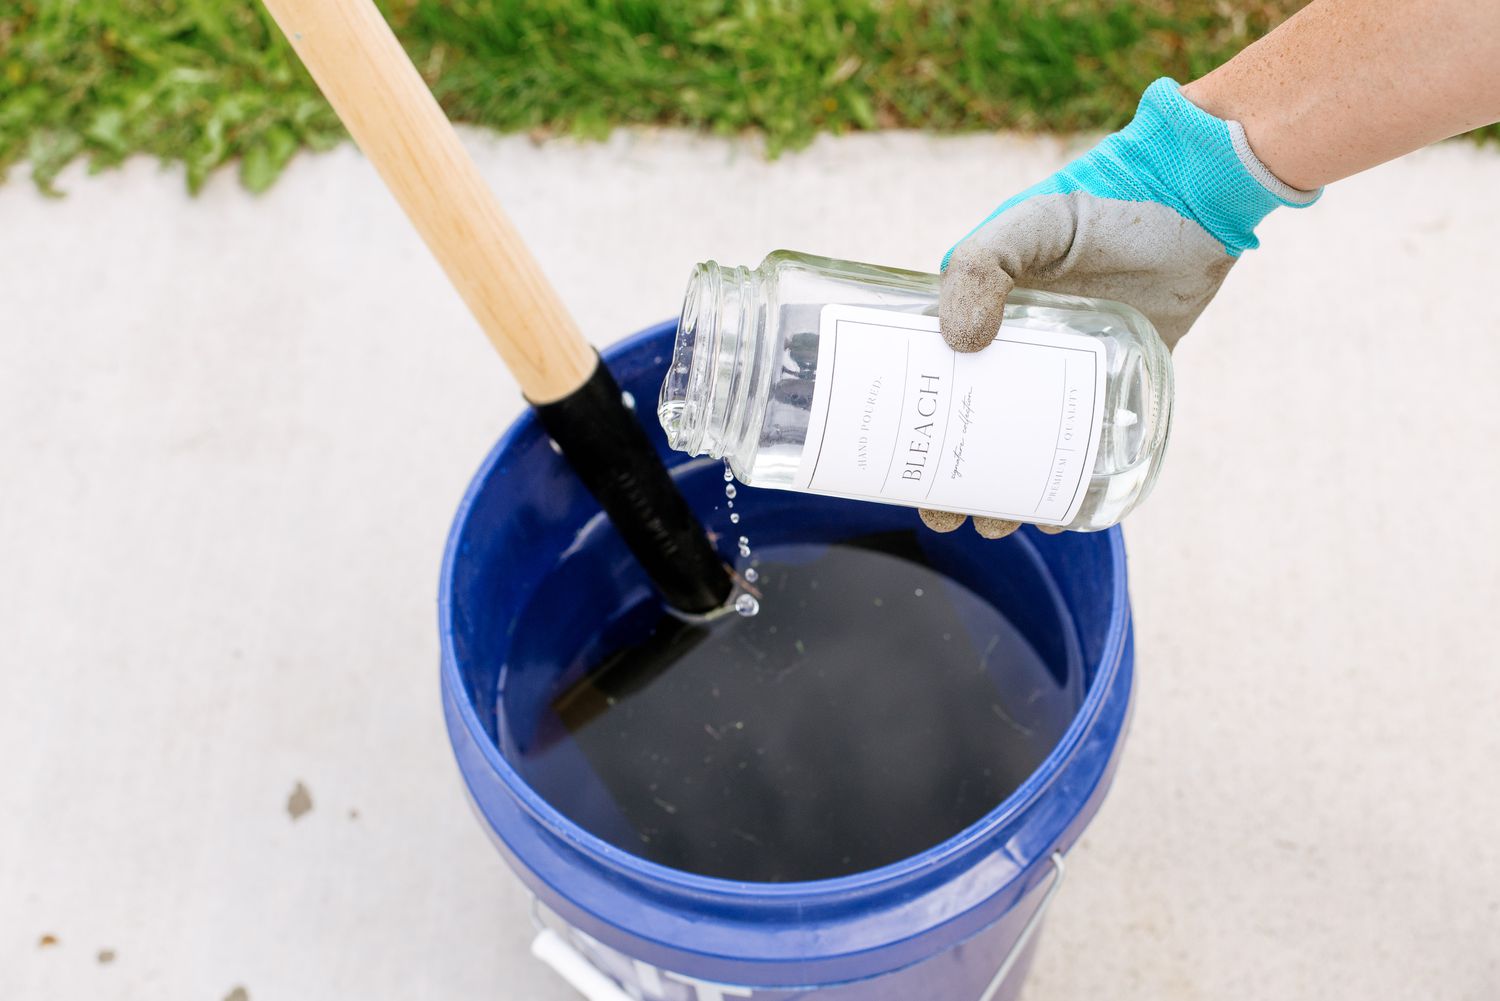 Shovel placed in bucket with water and bleach for sanitizing after removing dead bird